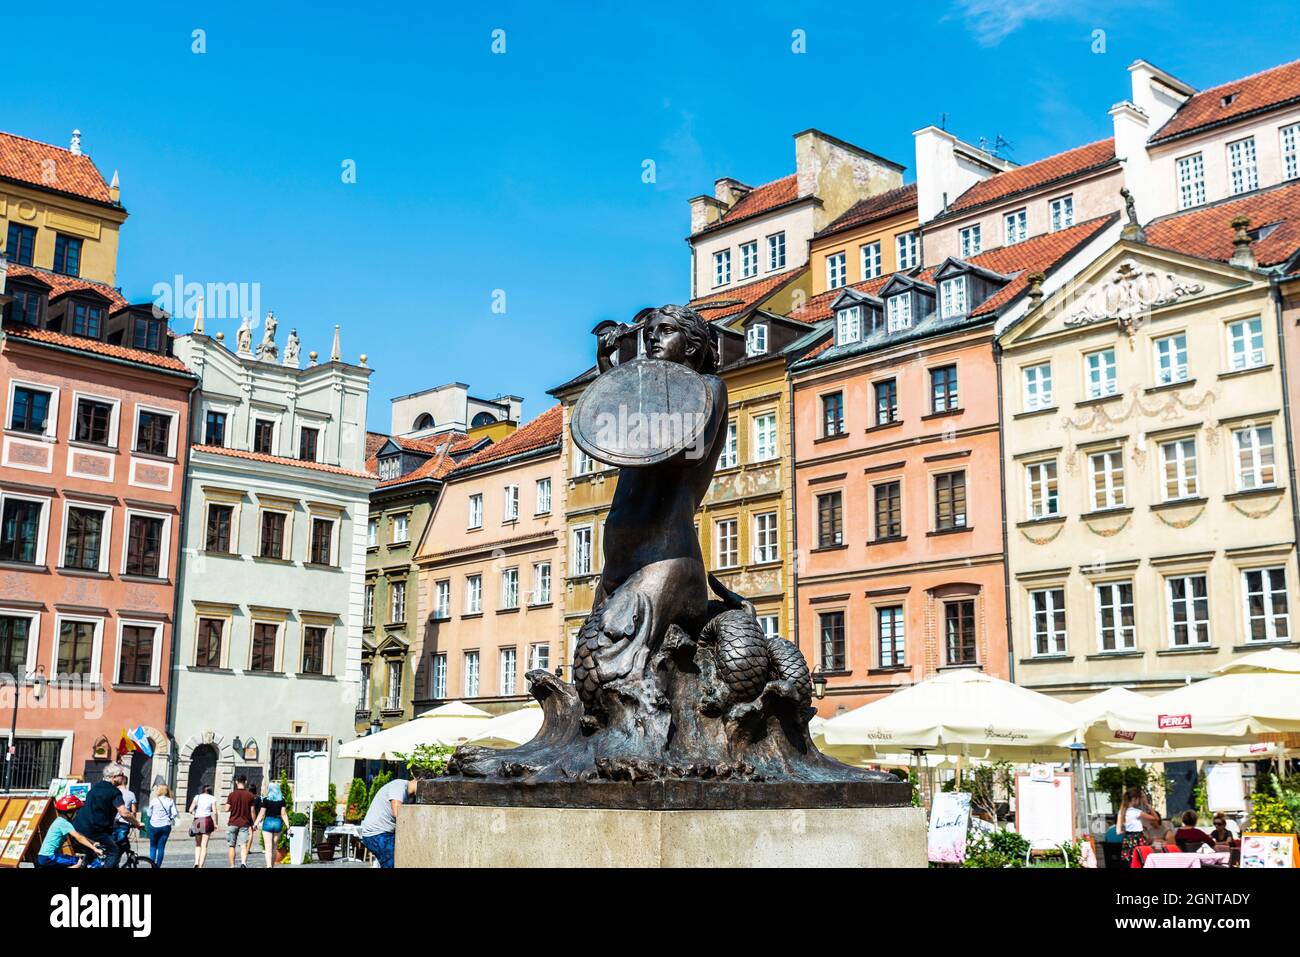 Warsaw, Poland - September 1, 2018: Syrenka or mermaid statue in the Old Town Market Place or Rynek Starego Miasta with bar and restaurants and people Stock Photo